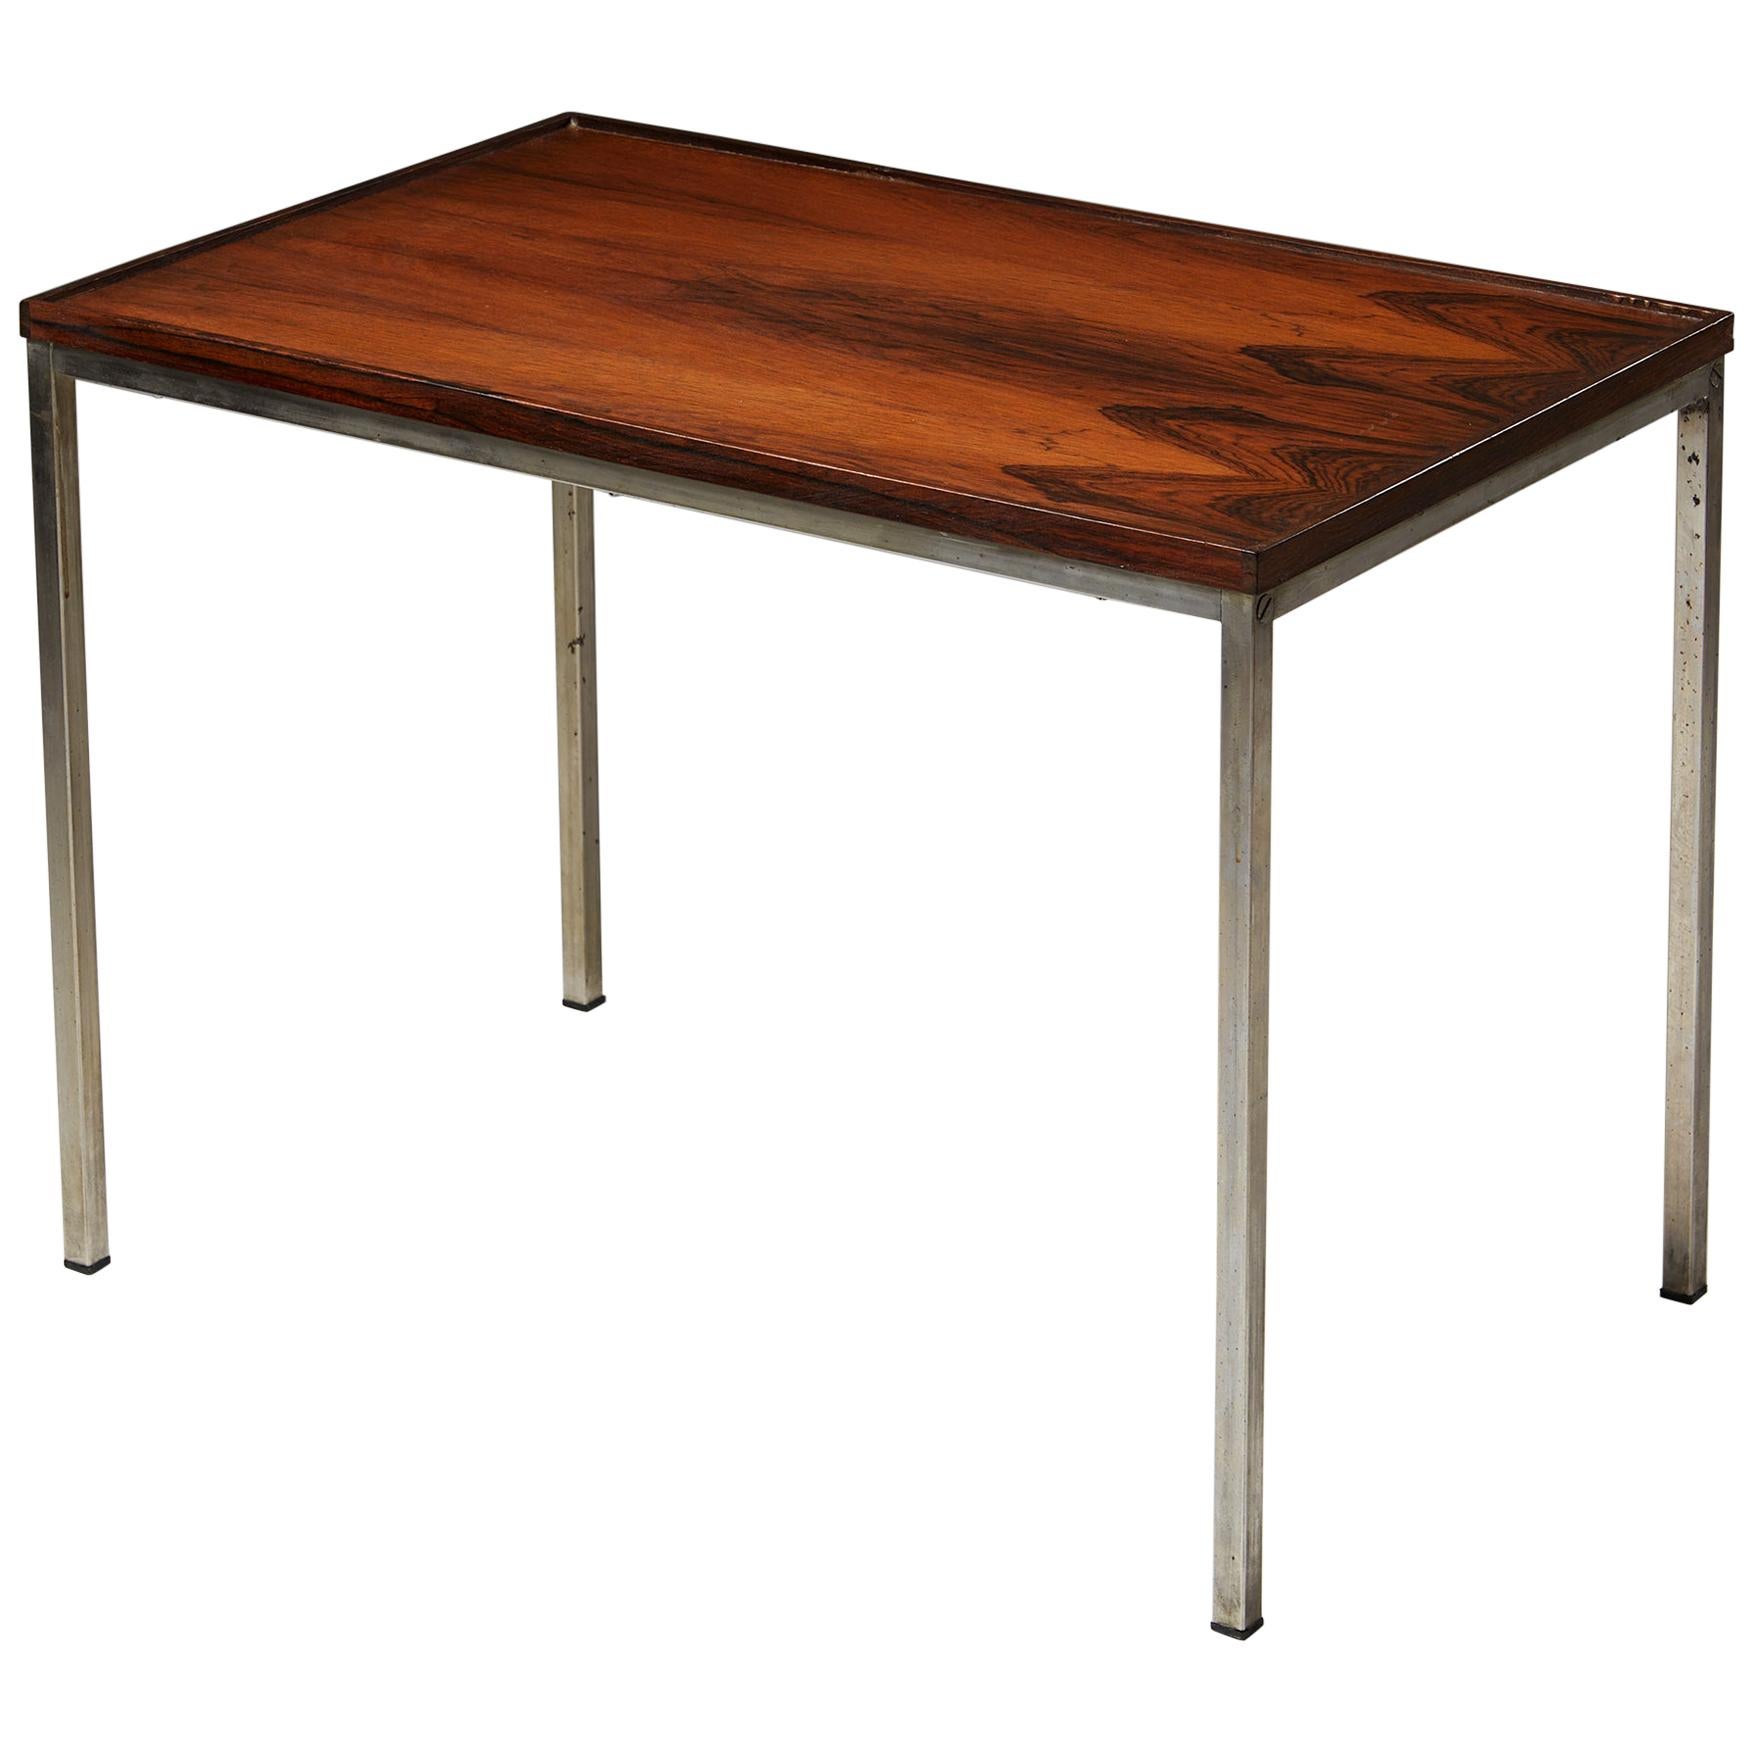 Side table, anonymous,
Sweden, 1960s.

Rosewood with metal frame and legs.

Dimensions:
L: 63 cm/ 2' 3/4